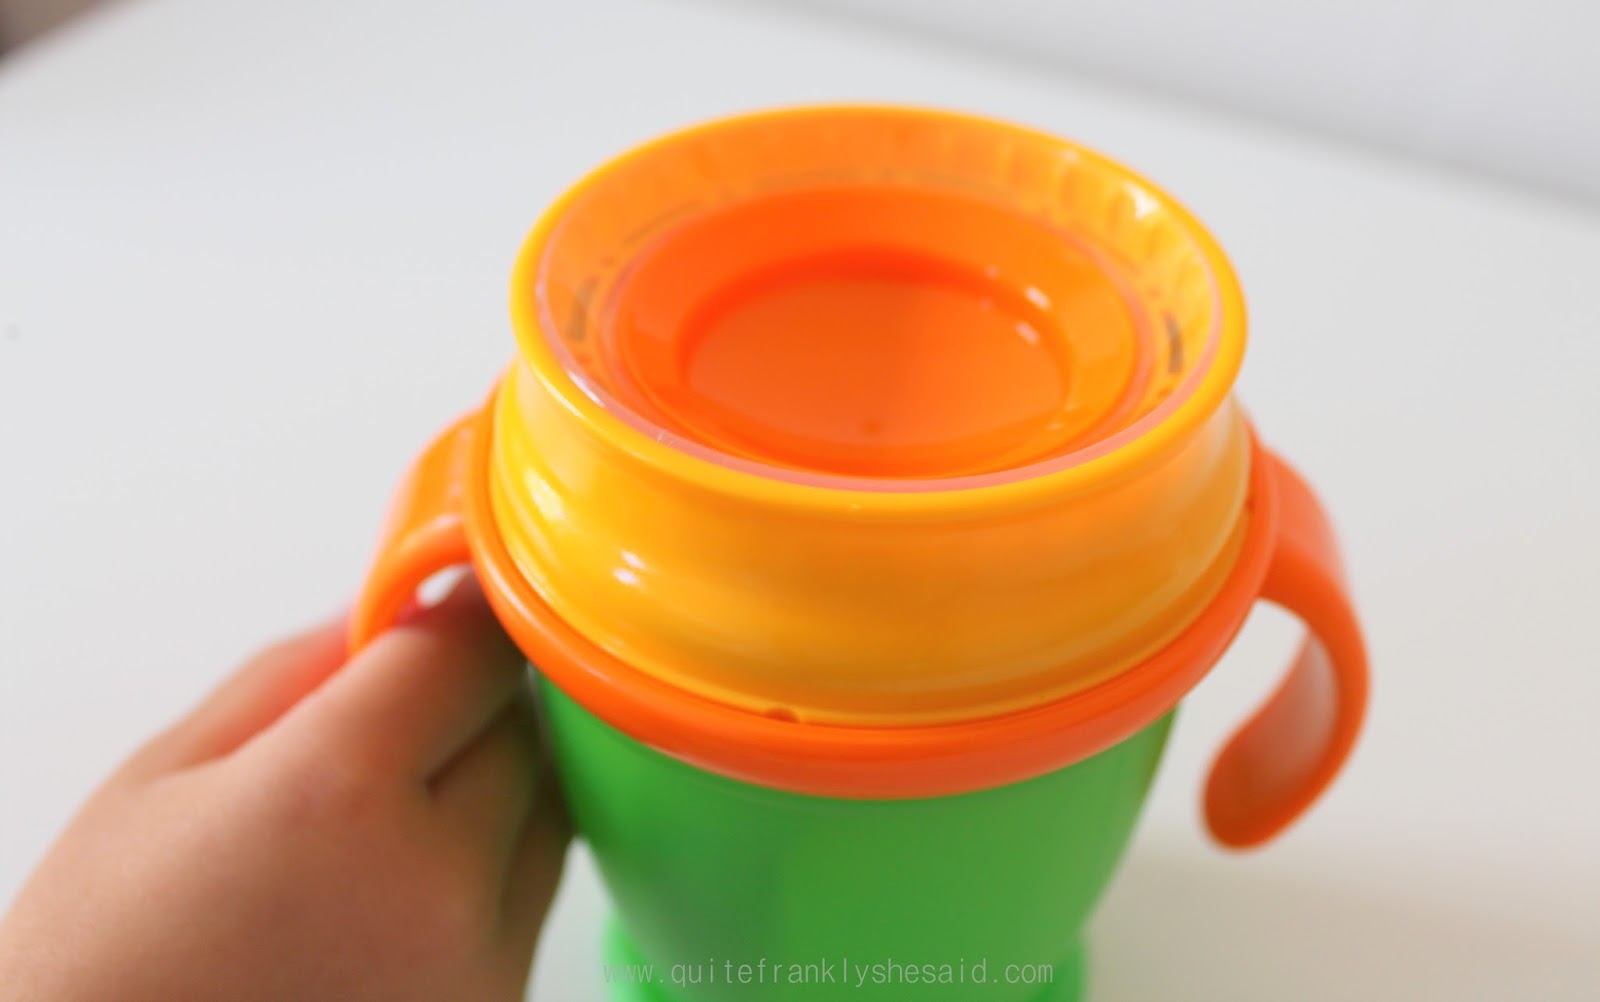 When Should a Toddler Drink from an Open Cup? And other Cup